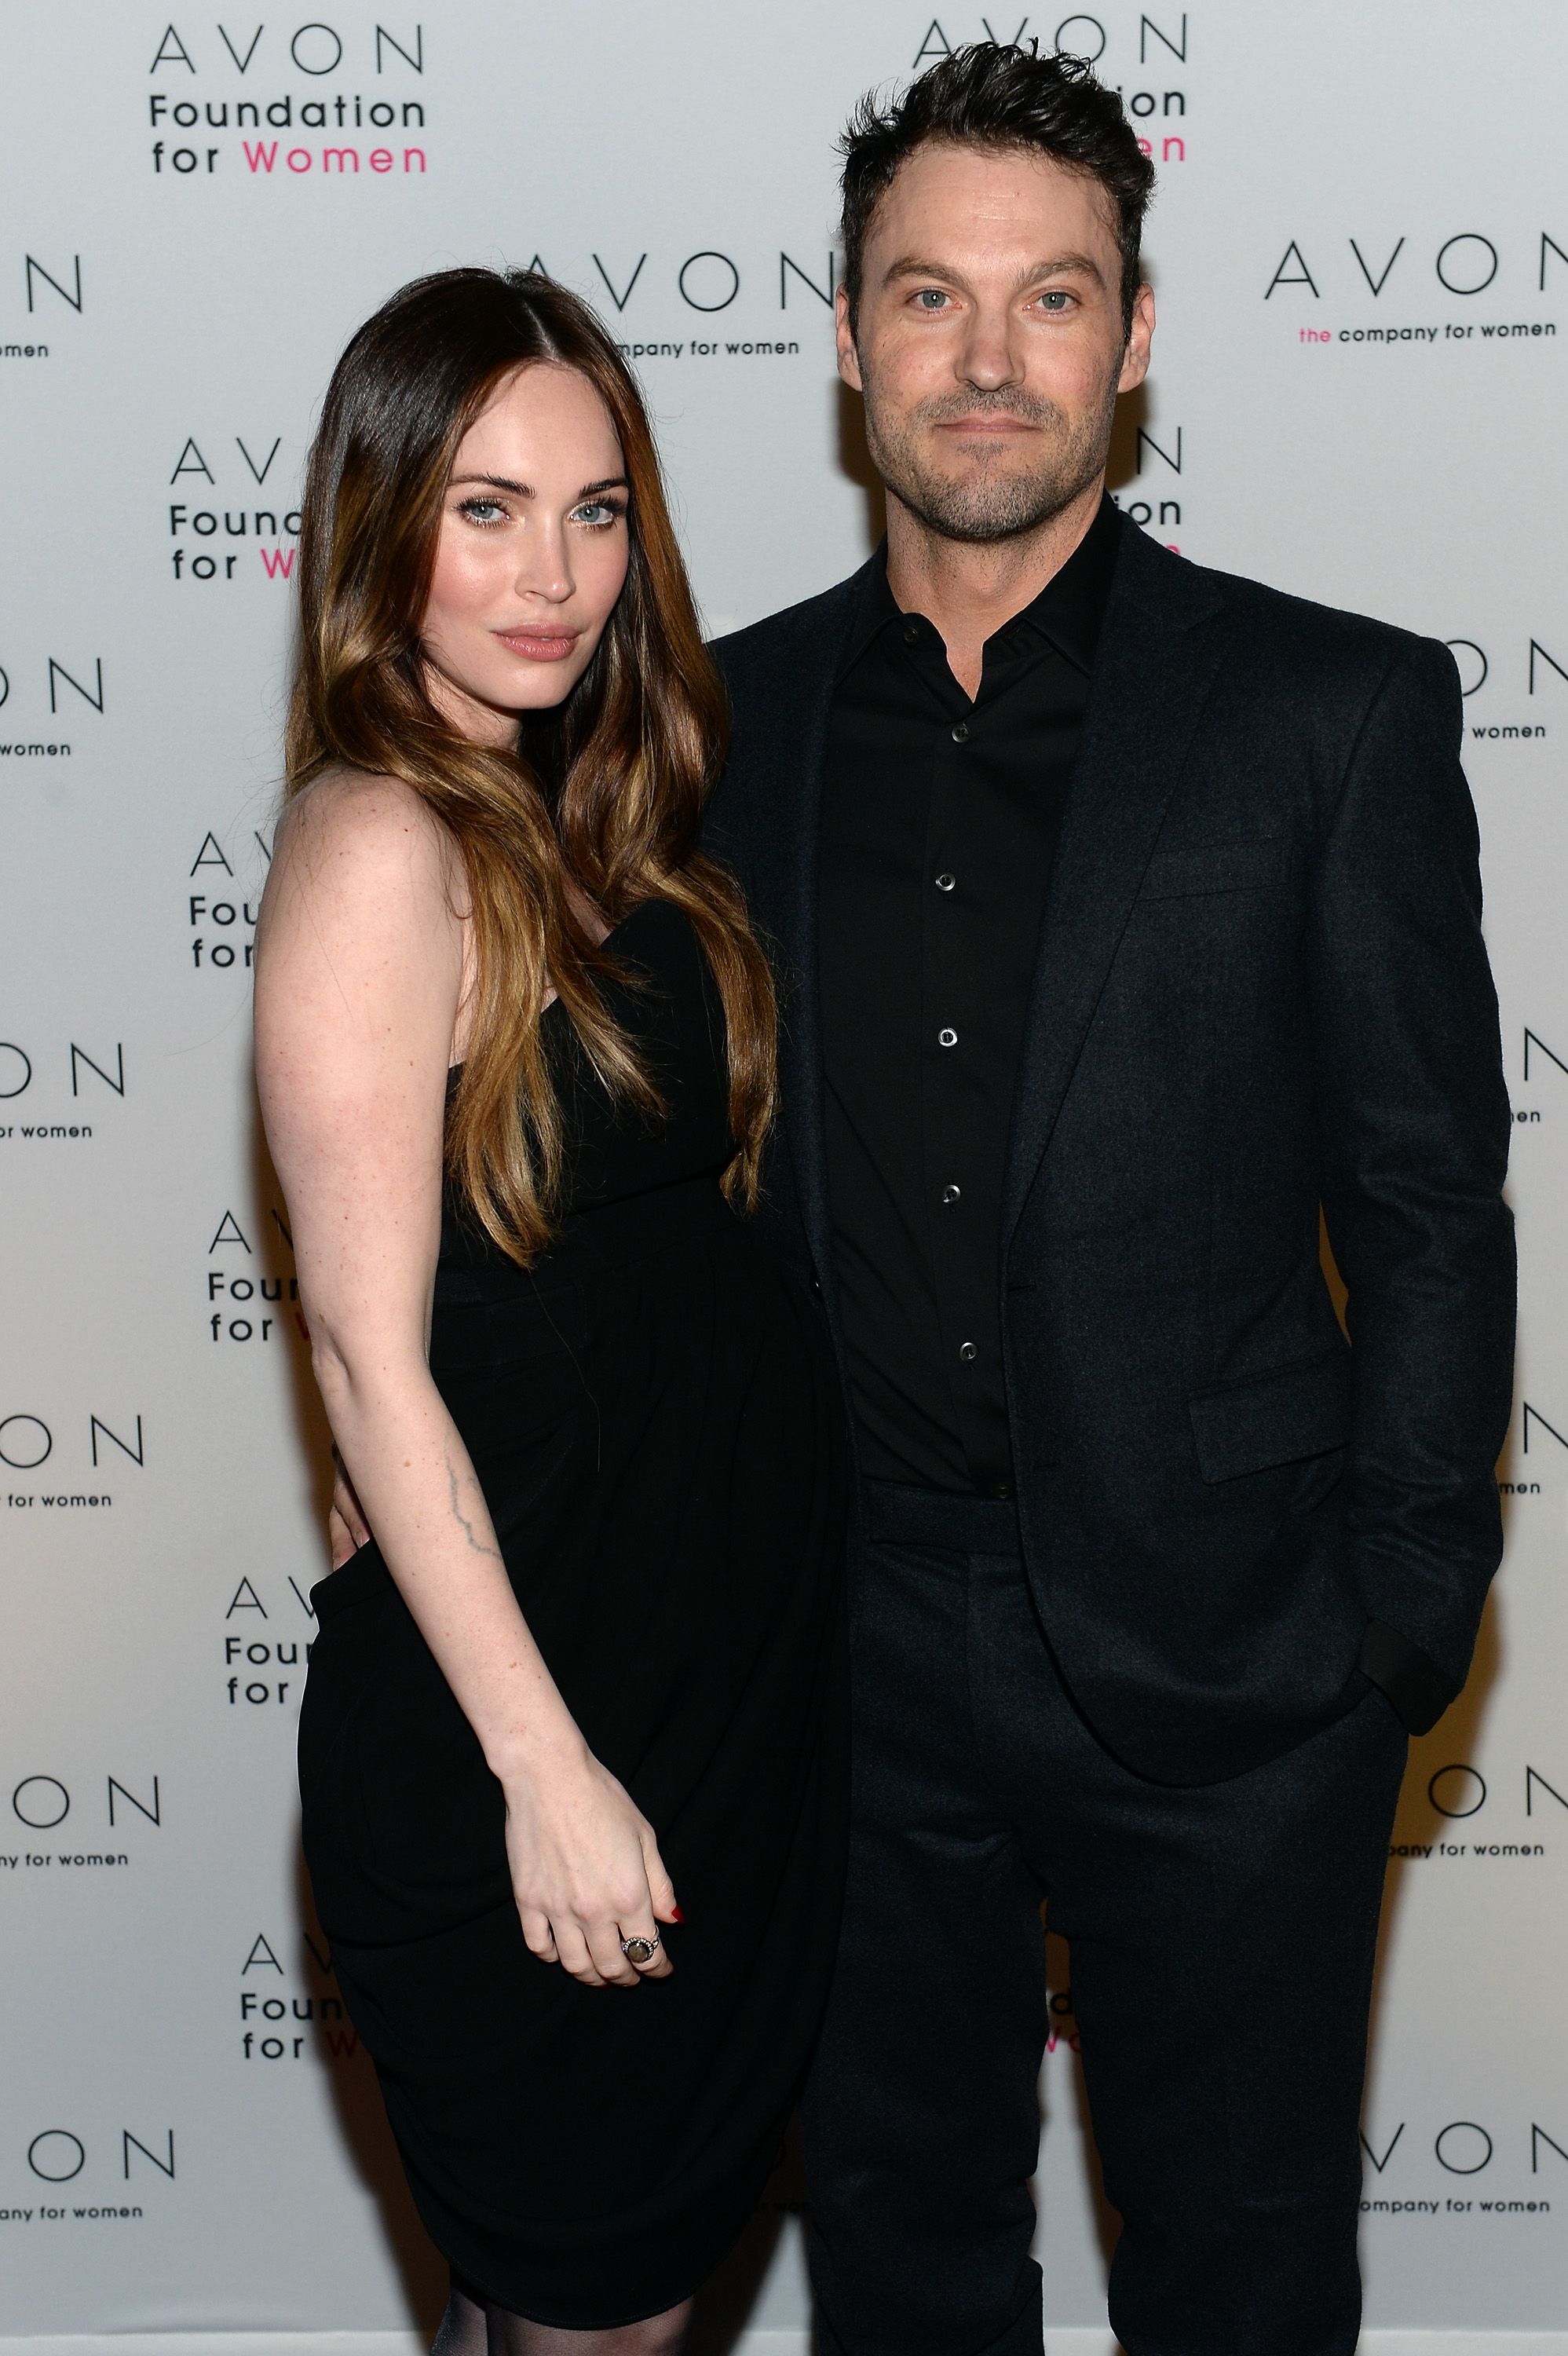 Megan Fox and Brian Austin Green at The Morgan Library & Museum in New York City at the Avon Foundation launch of its #SeeTheSigns of Domestic Violence global social media campaign. | Source: Getty Images